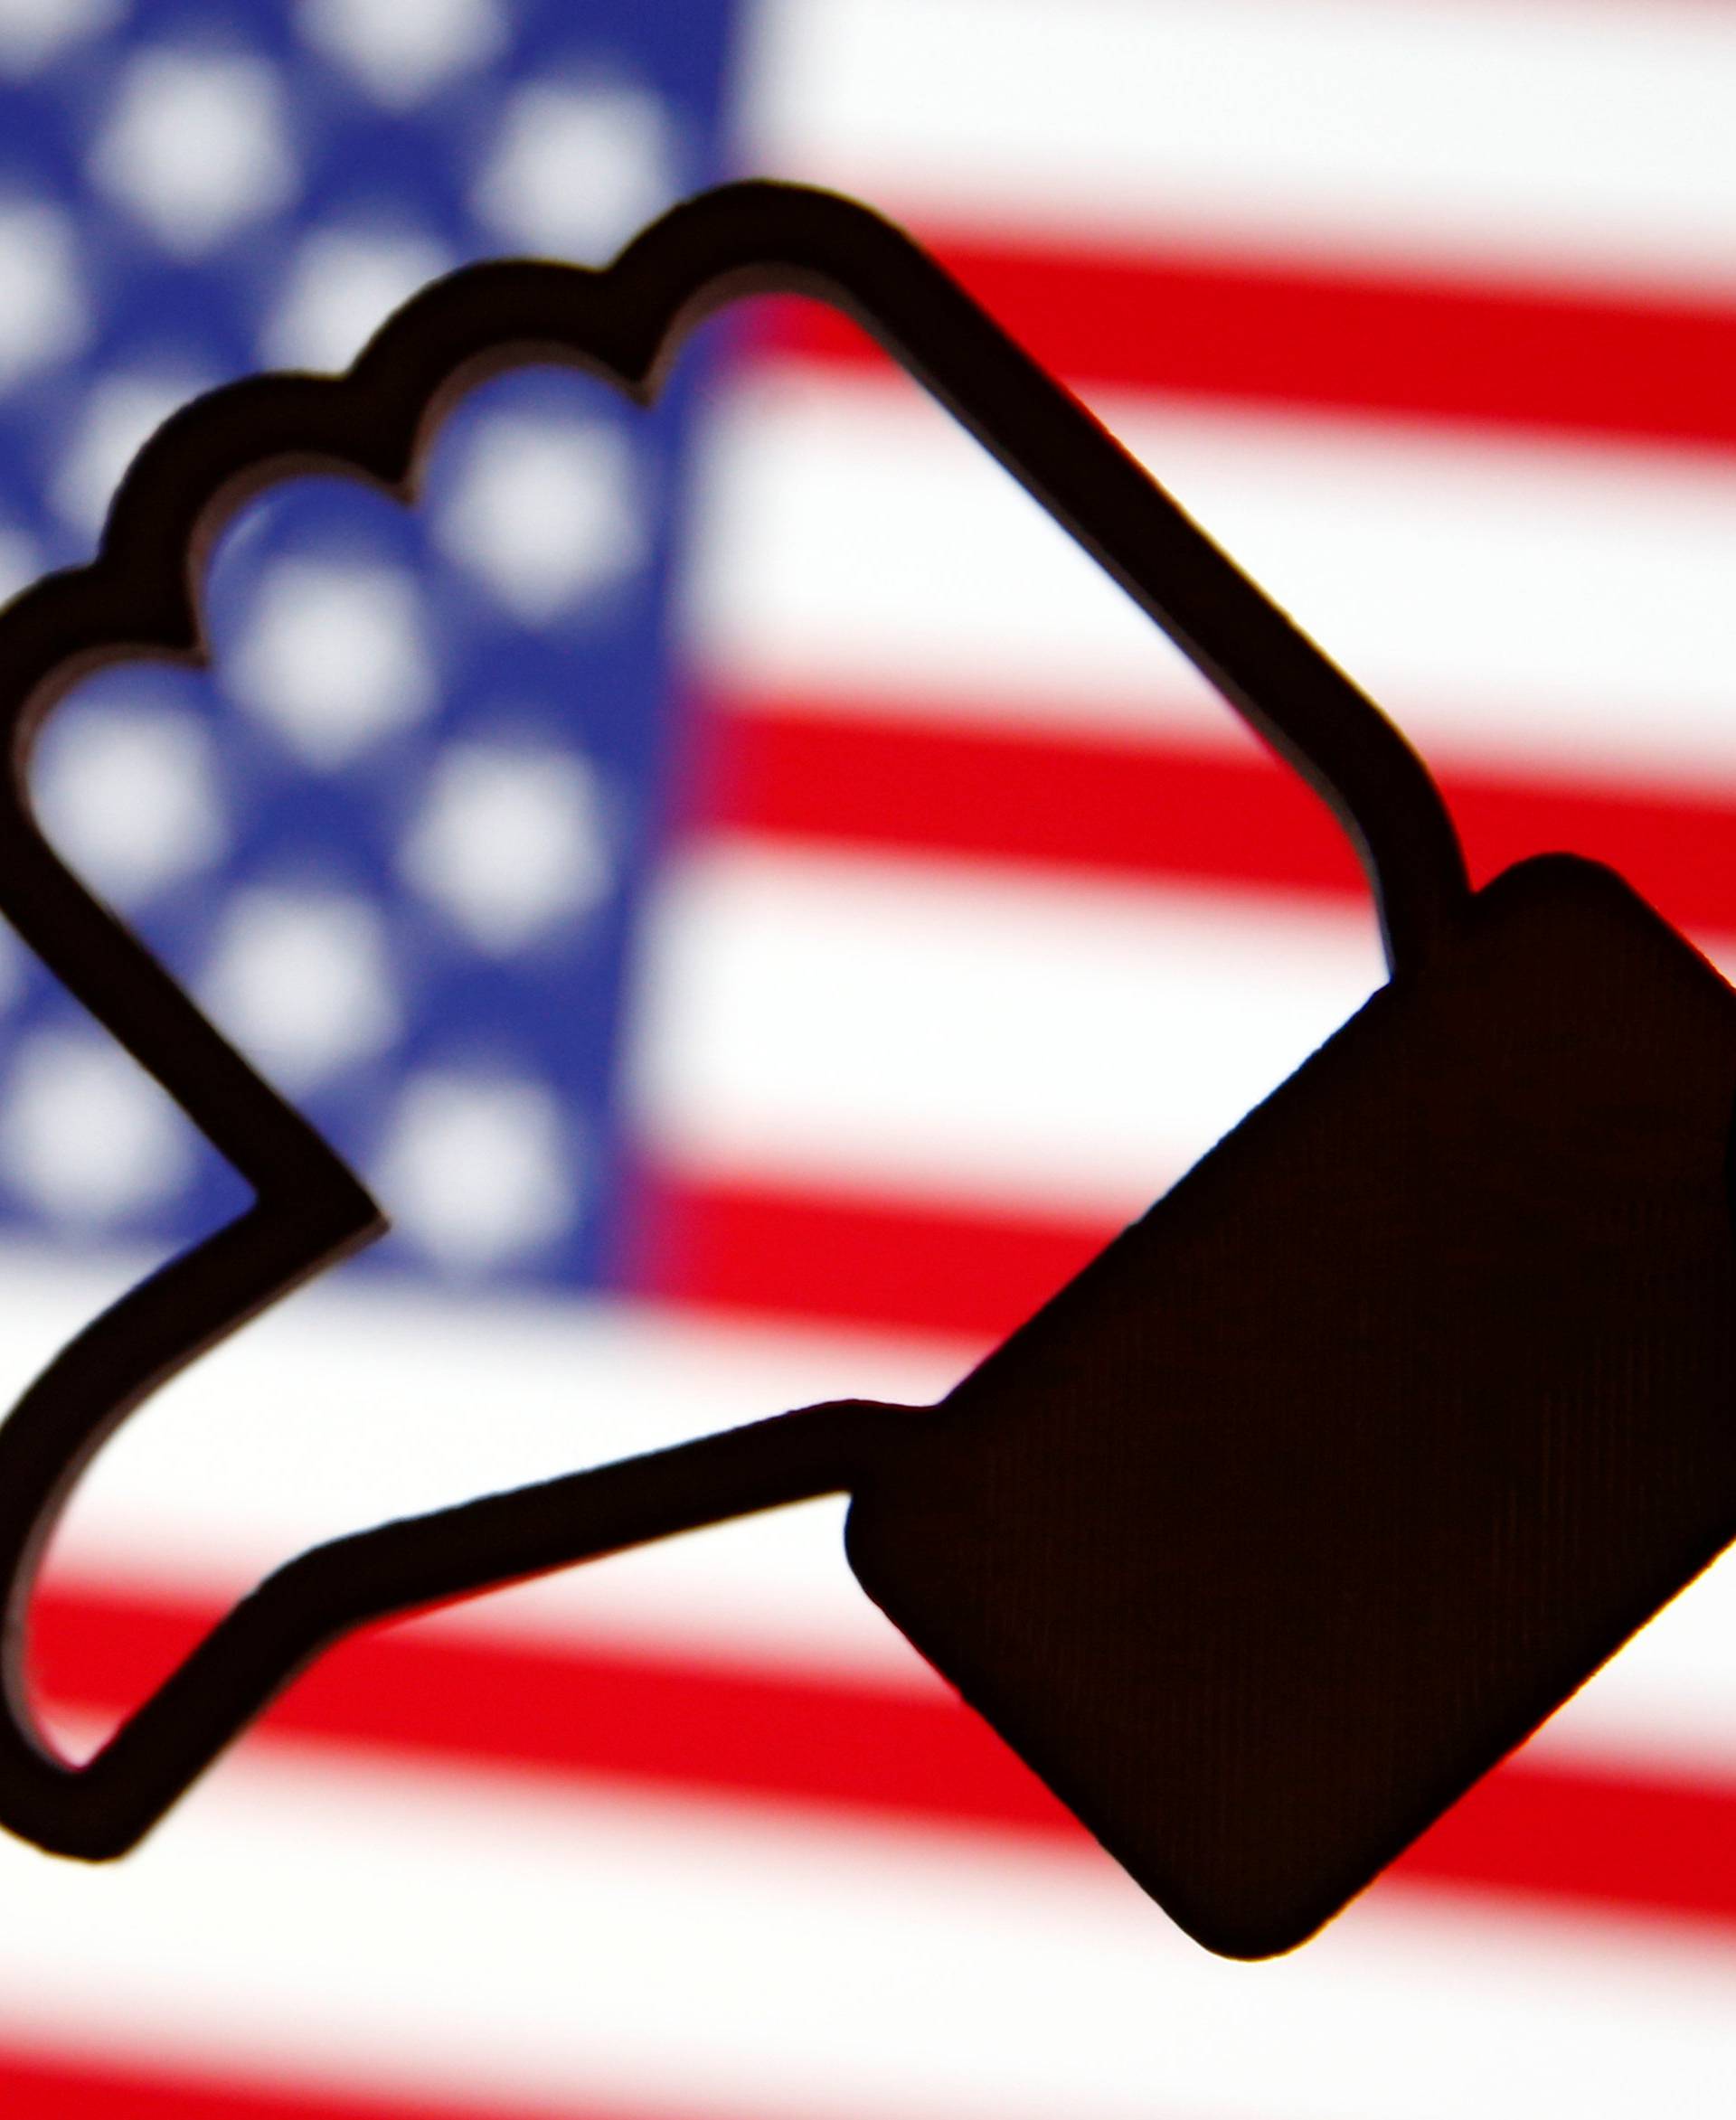 A 3D-printed Facebook Like symbol is displayed inverted in front of a U.S. flag in this illustration